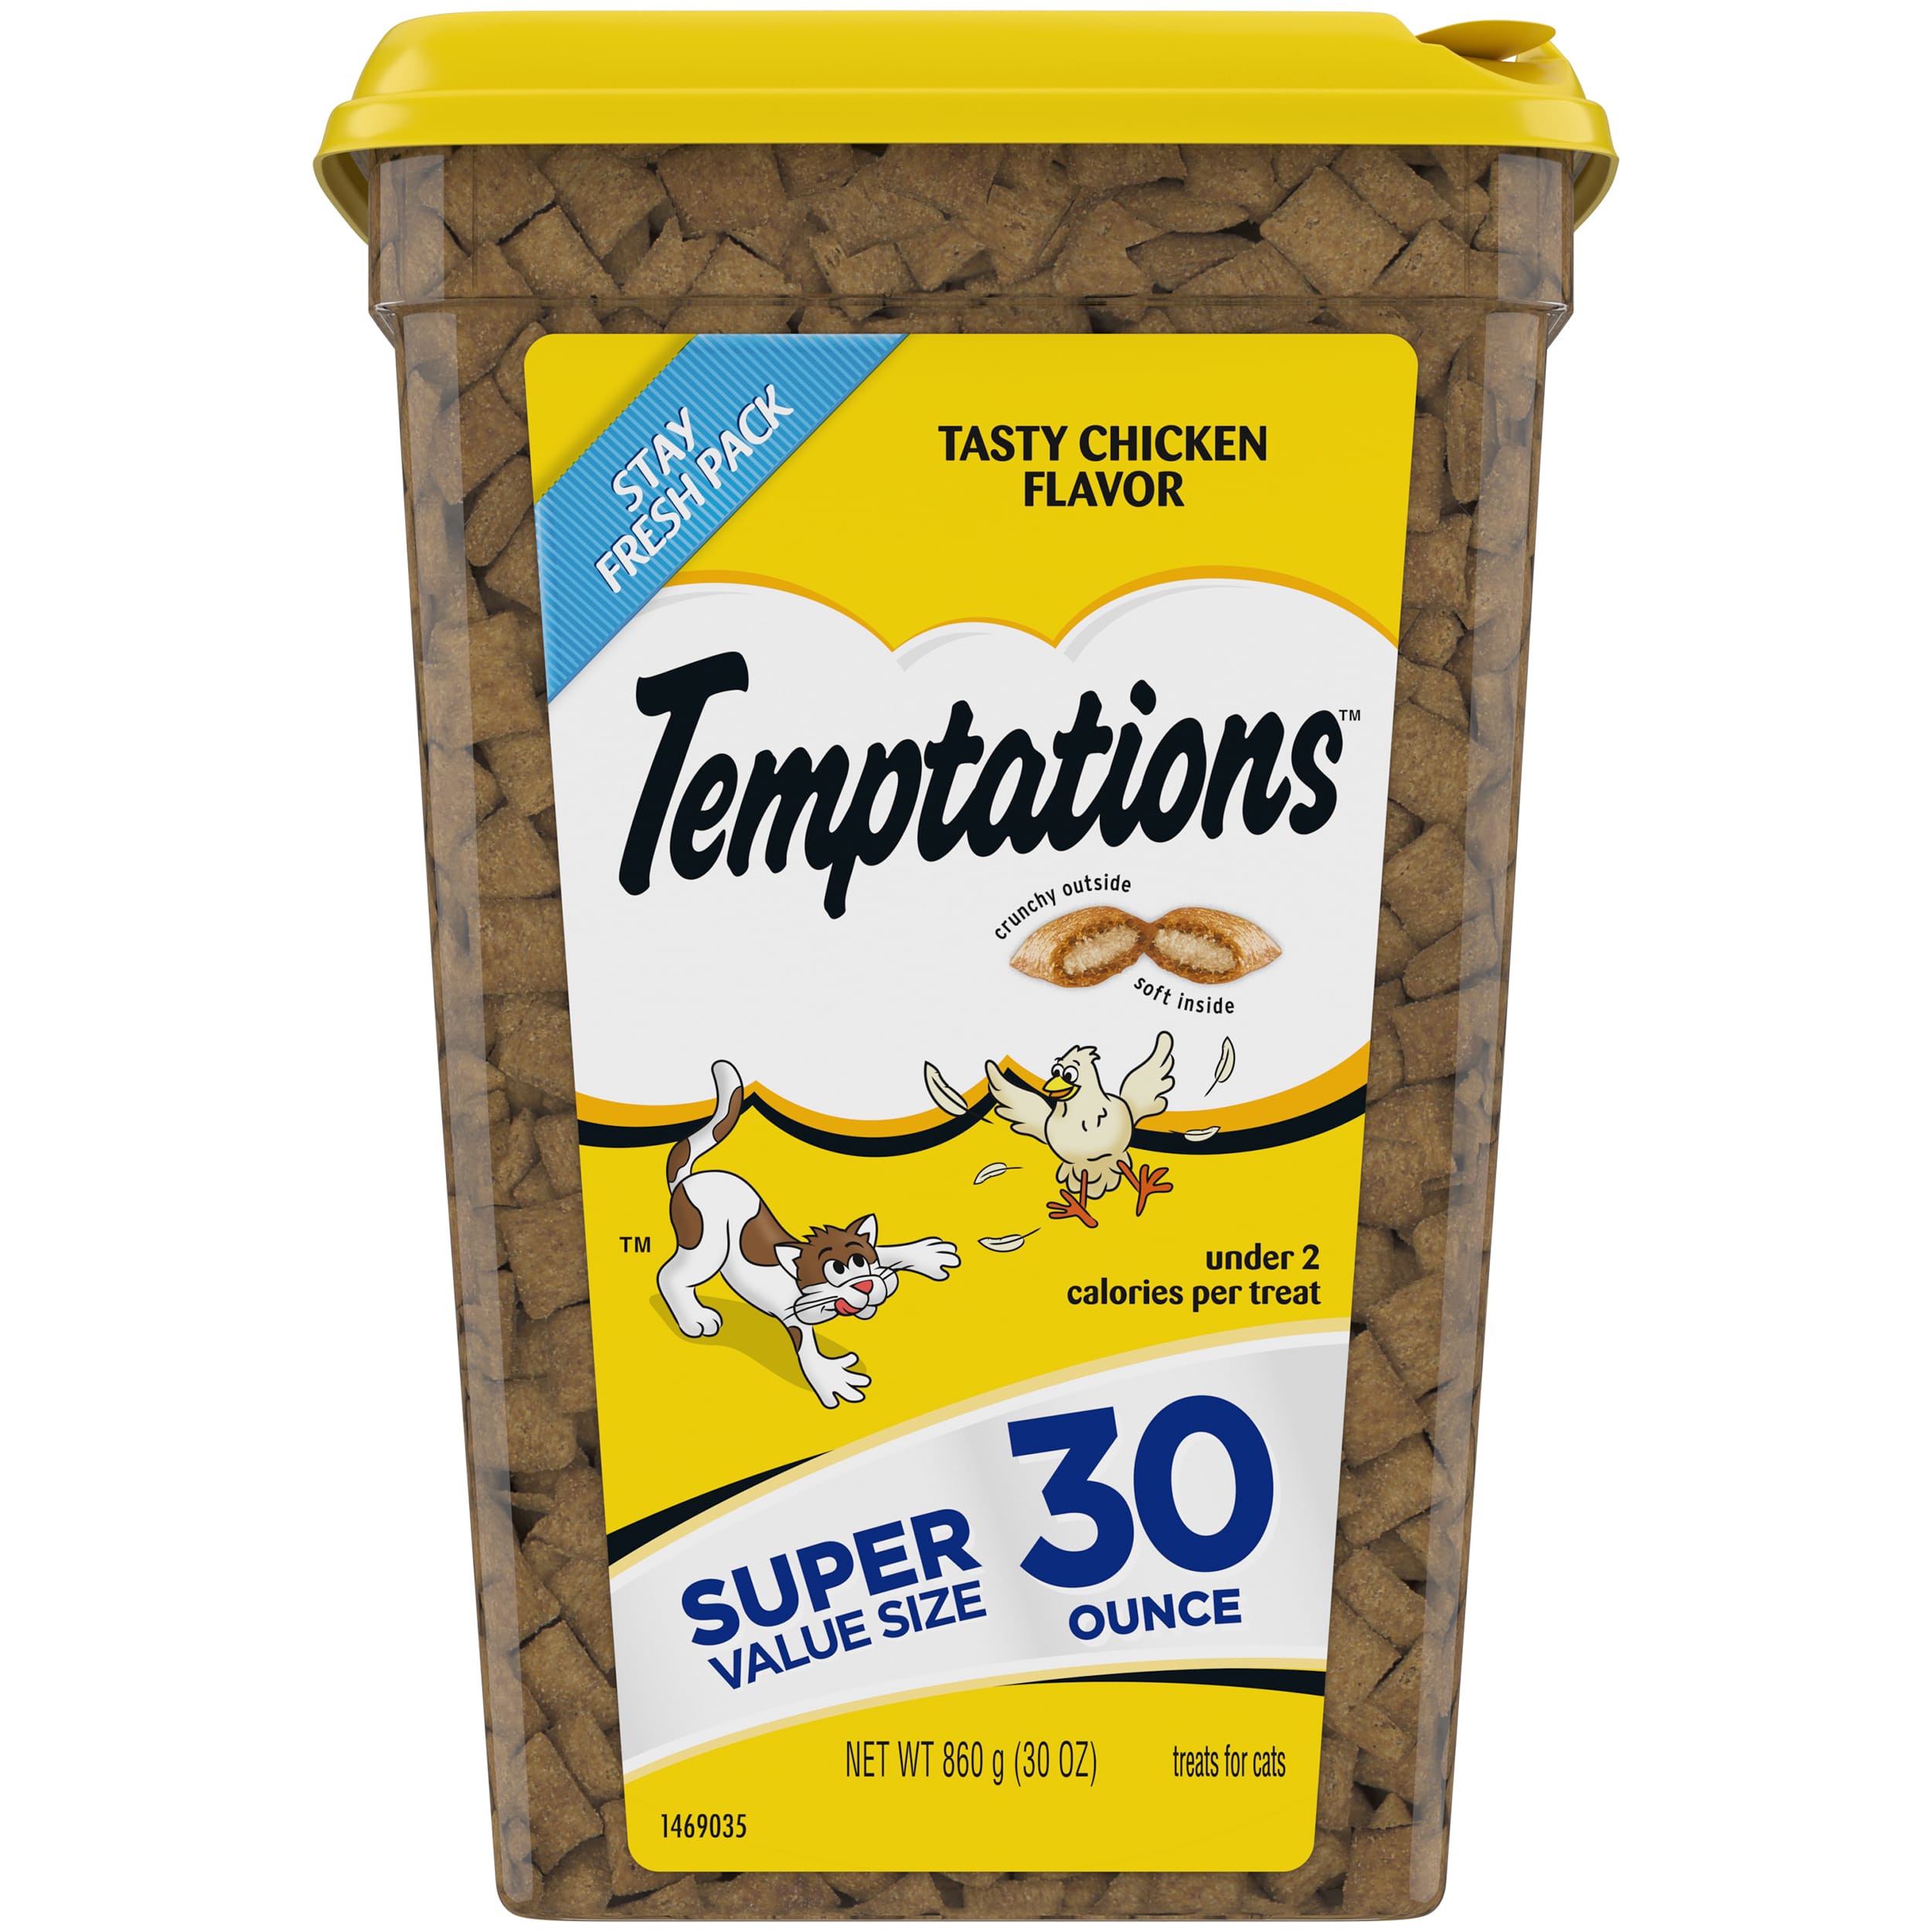 Temptations Tasty Chicken Flavor Crunchy and Soft Cat Treats, 30 oz Tub - image 1 of 12